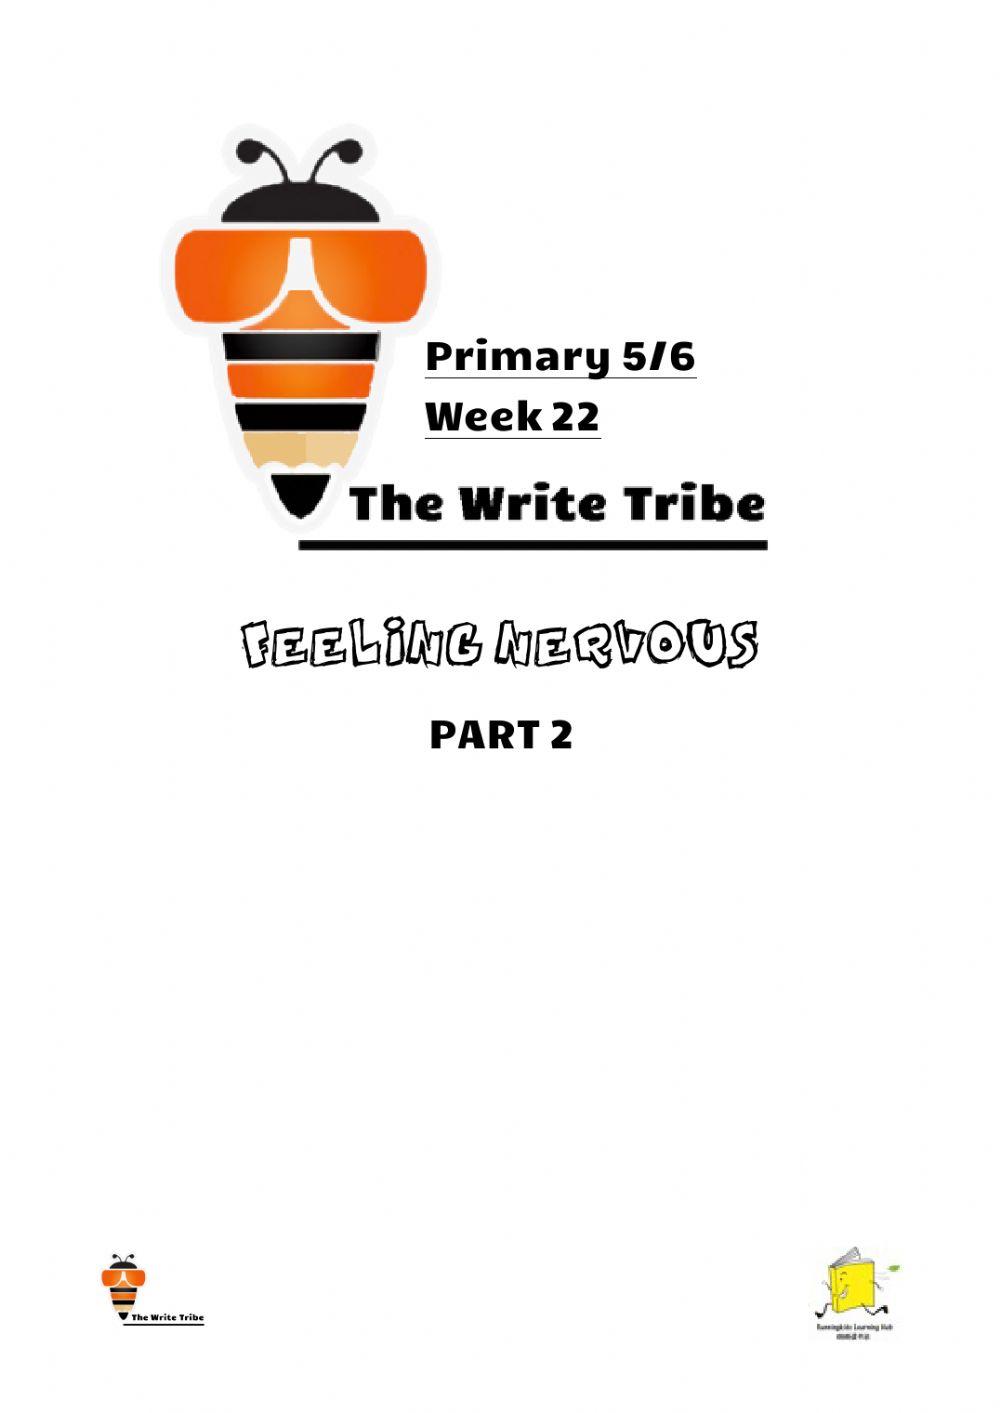 Week 22 e-learning p5-6 part 2